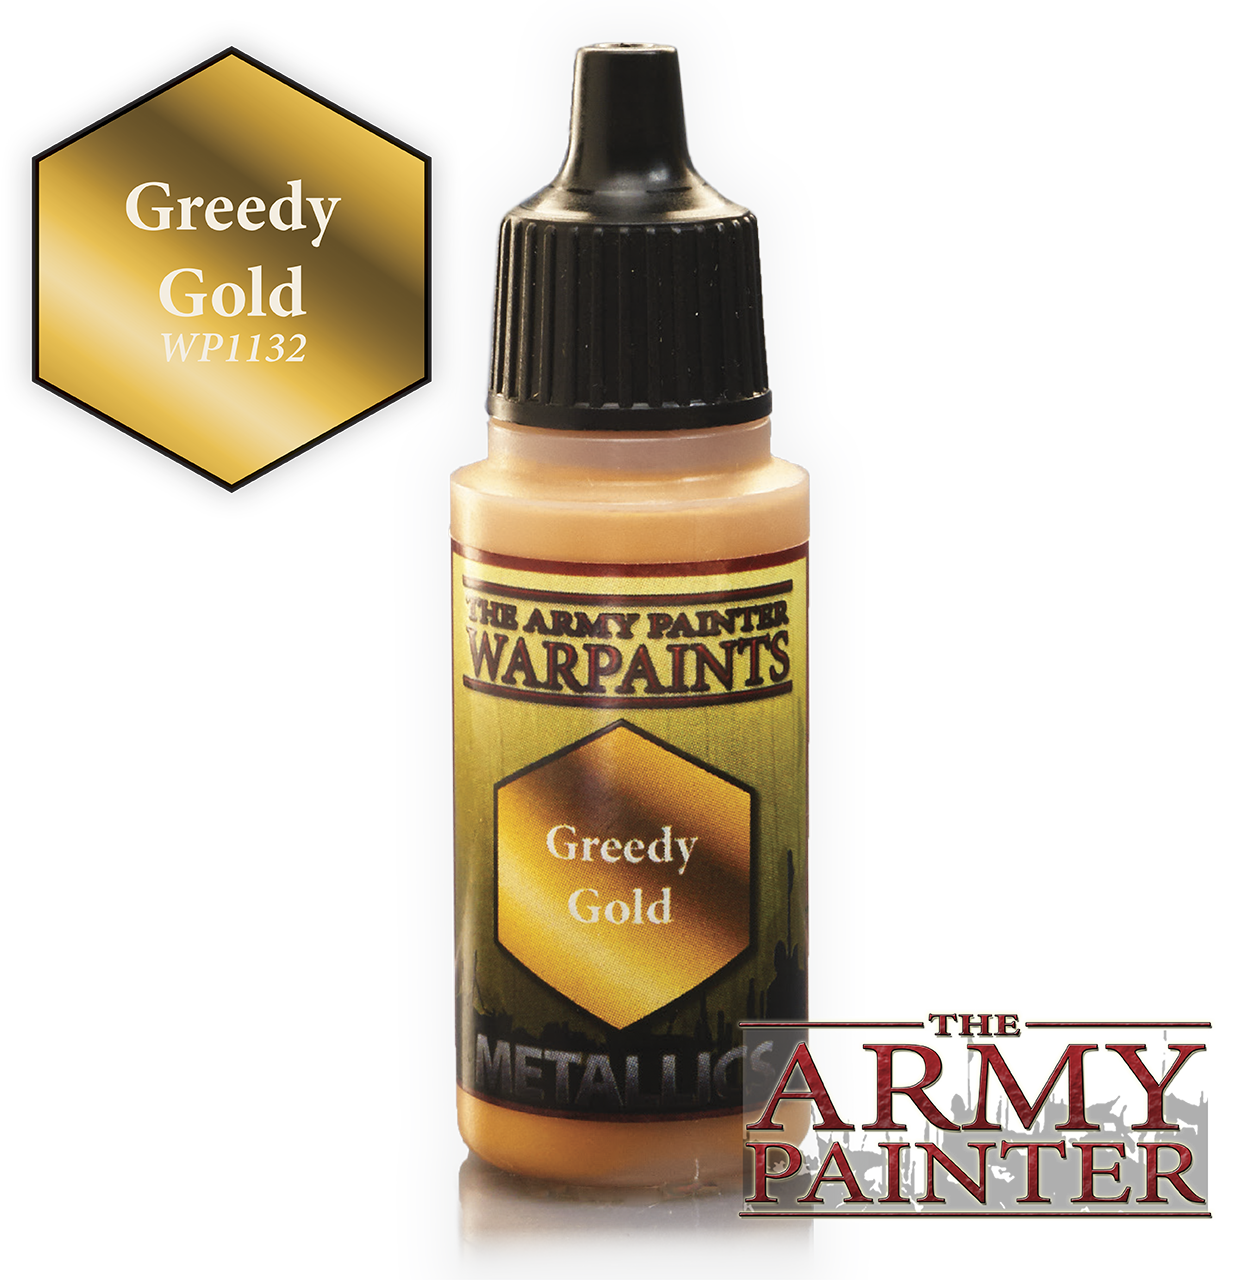 The ARMY PAINTER: Metallics Warpaints - Greedy Gold | Tacoma Games